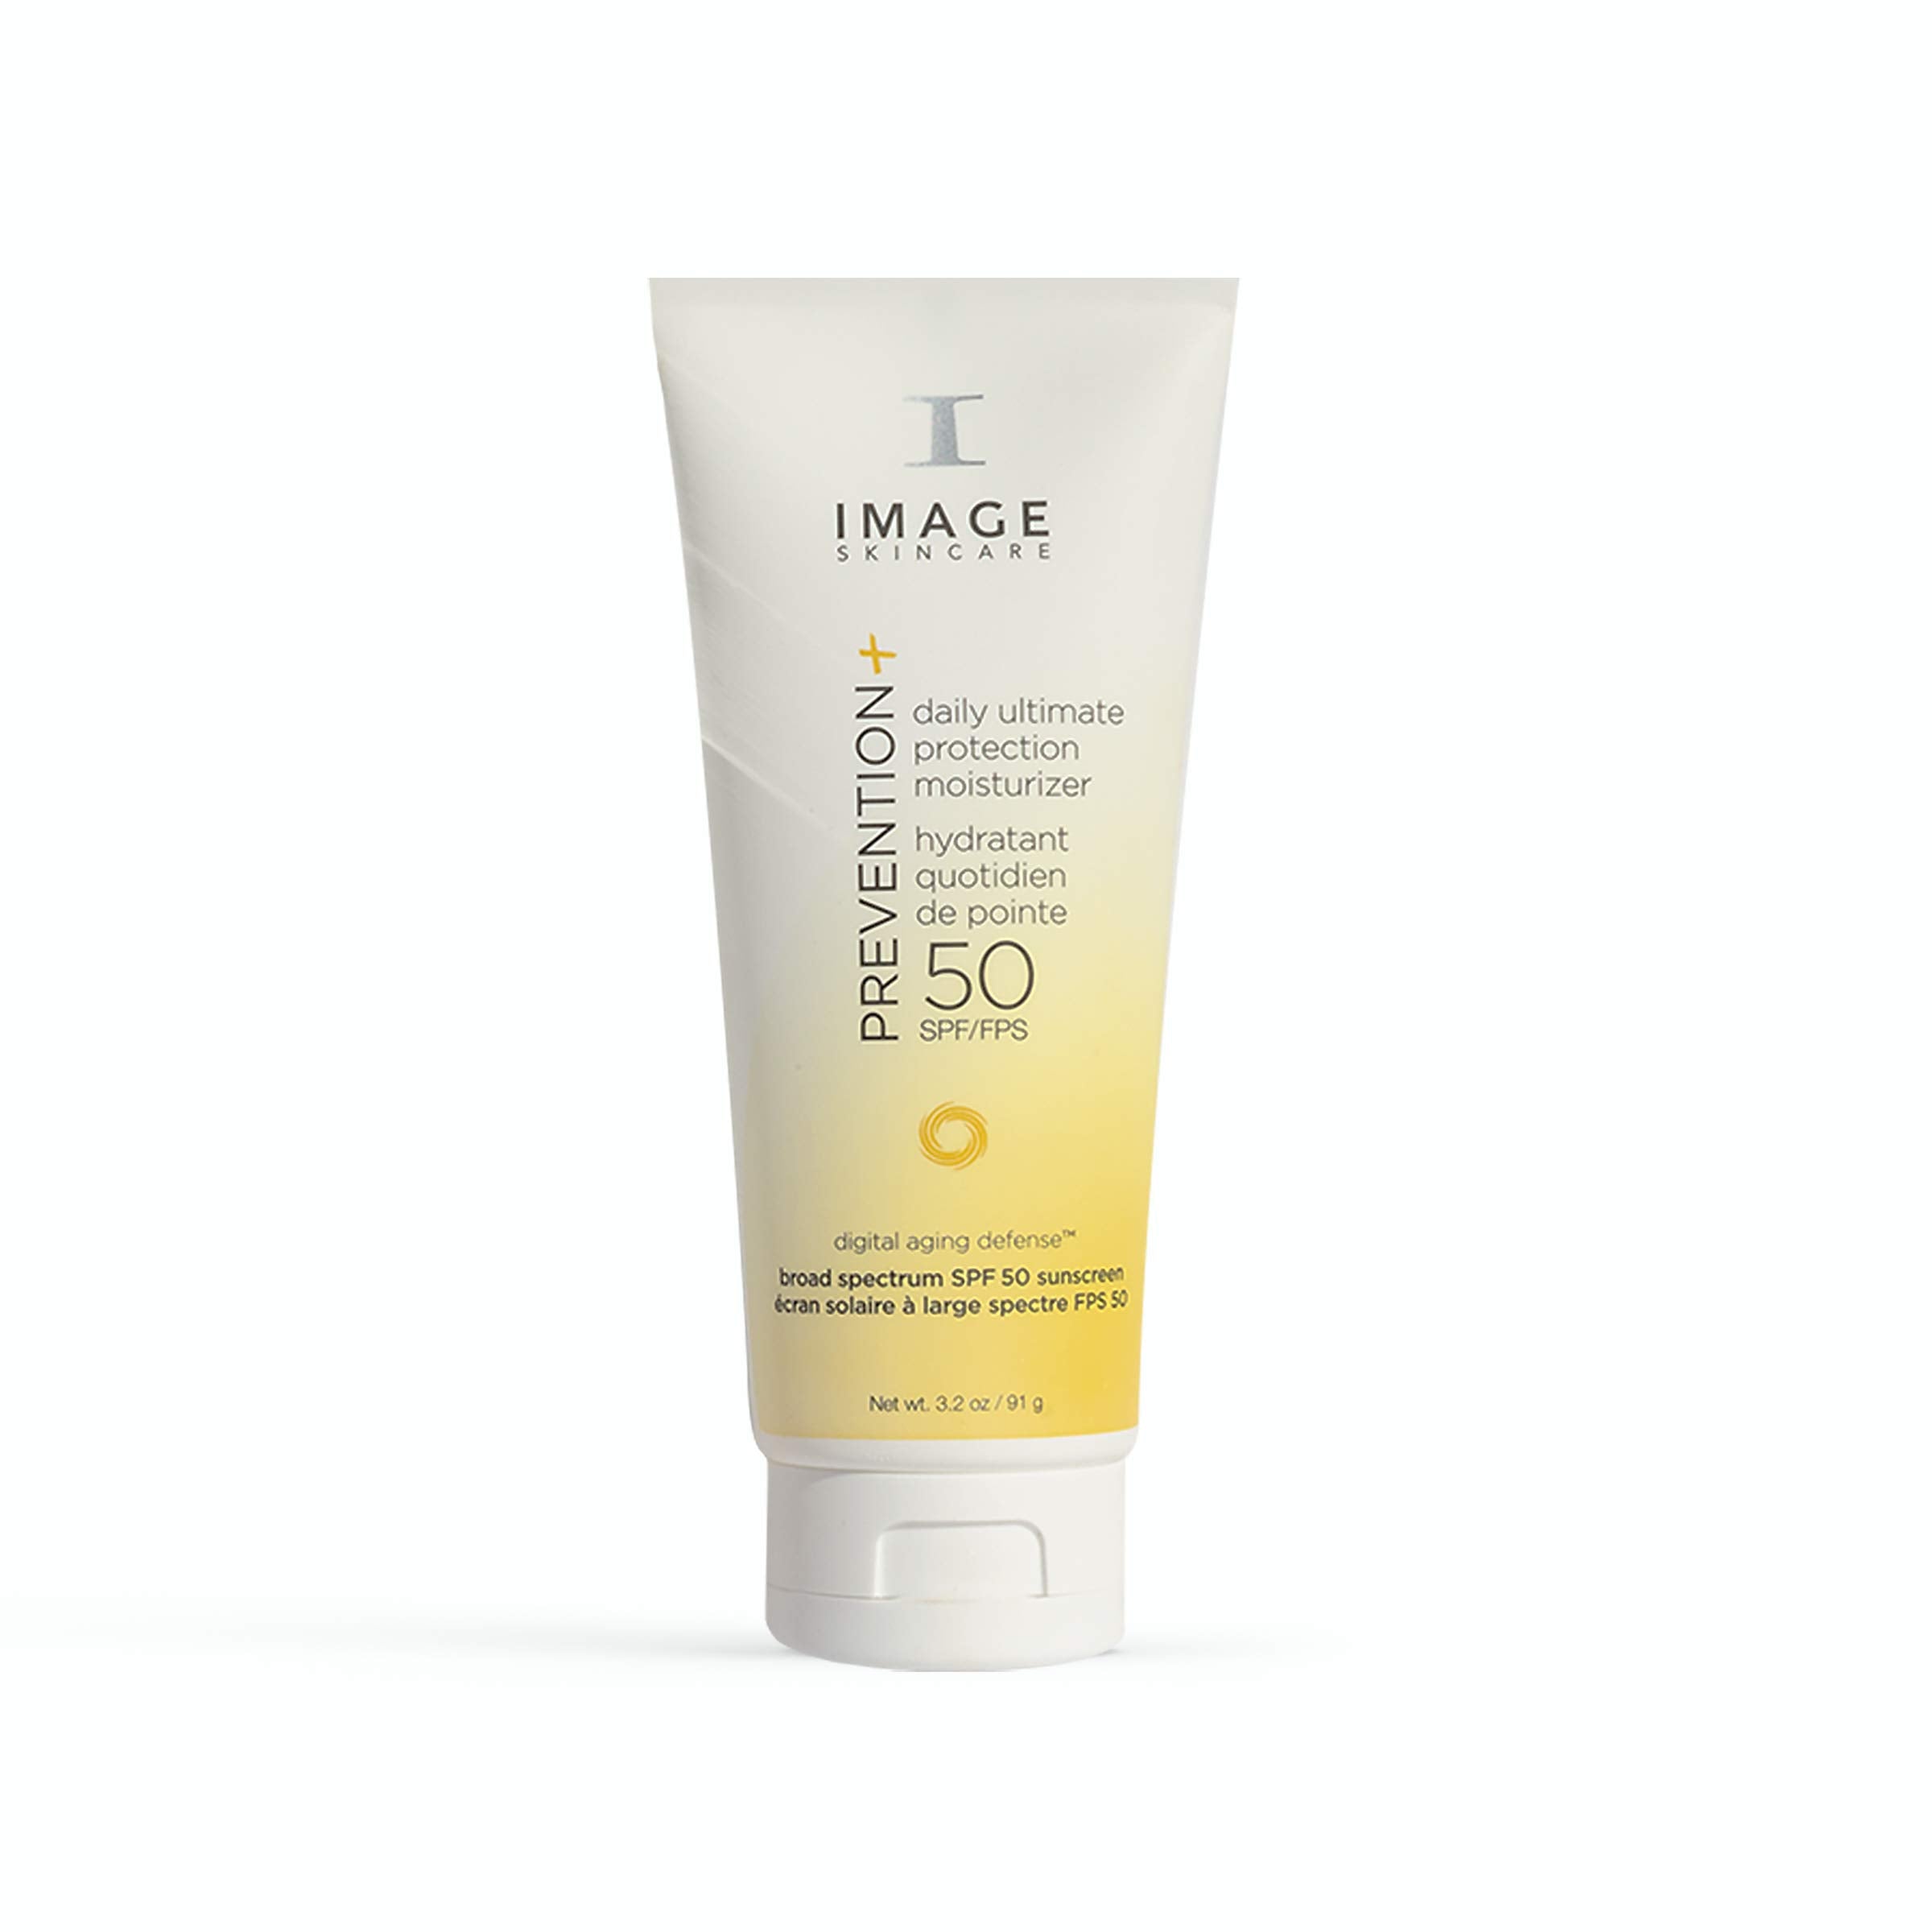 Image Skincare - Prevention+ Daily Ultimate Moisturizer Spf 50 (91g), (Pack of 1)